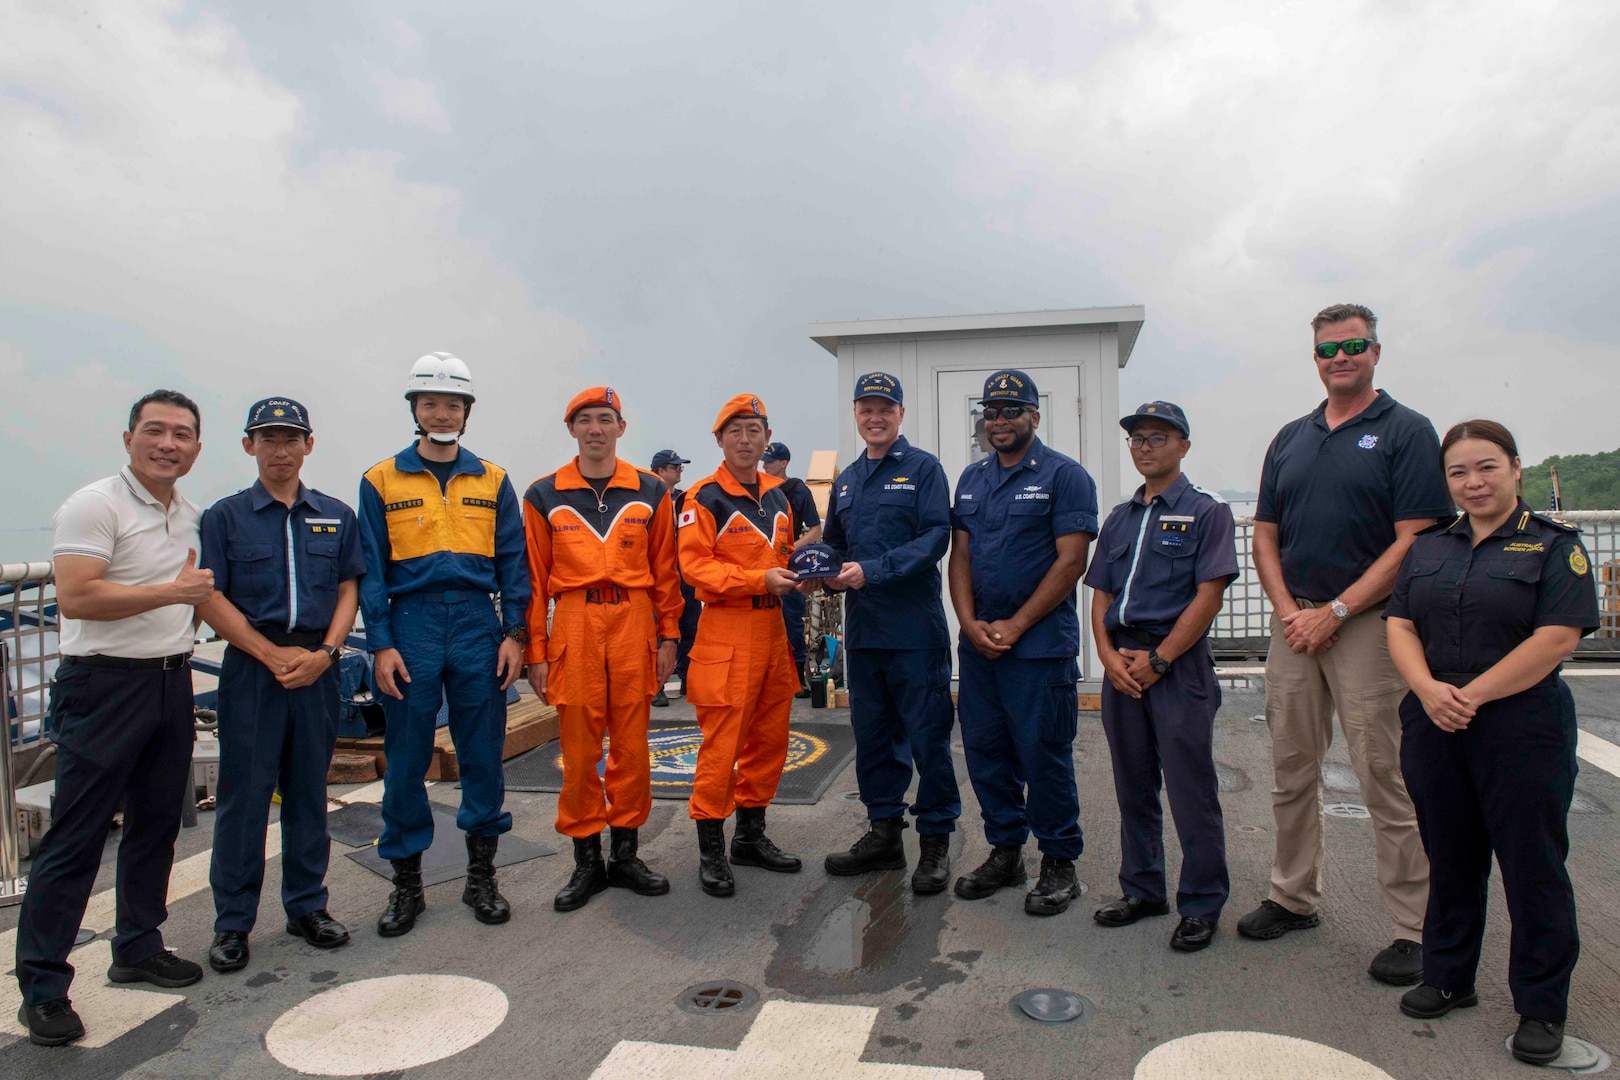 Members of the Japanese Coast Guard accept a gift from U.S. Coast Guard Capt. Billy Mees, commanding officer of U.S. Coast Guard Cutter Bertholf (WMSL 750), March 3. Bertholf was in Malaysia for a multiple day engagement which directly supports U.S. foreign policy and national security objectives in the Indo-Pacific Strategy and the National Security Strategy. (U.S. Navy photo taken by Mass Communication Specialist 3rd Class Charlotte Duran)